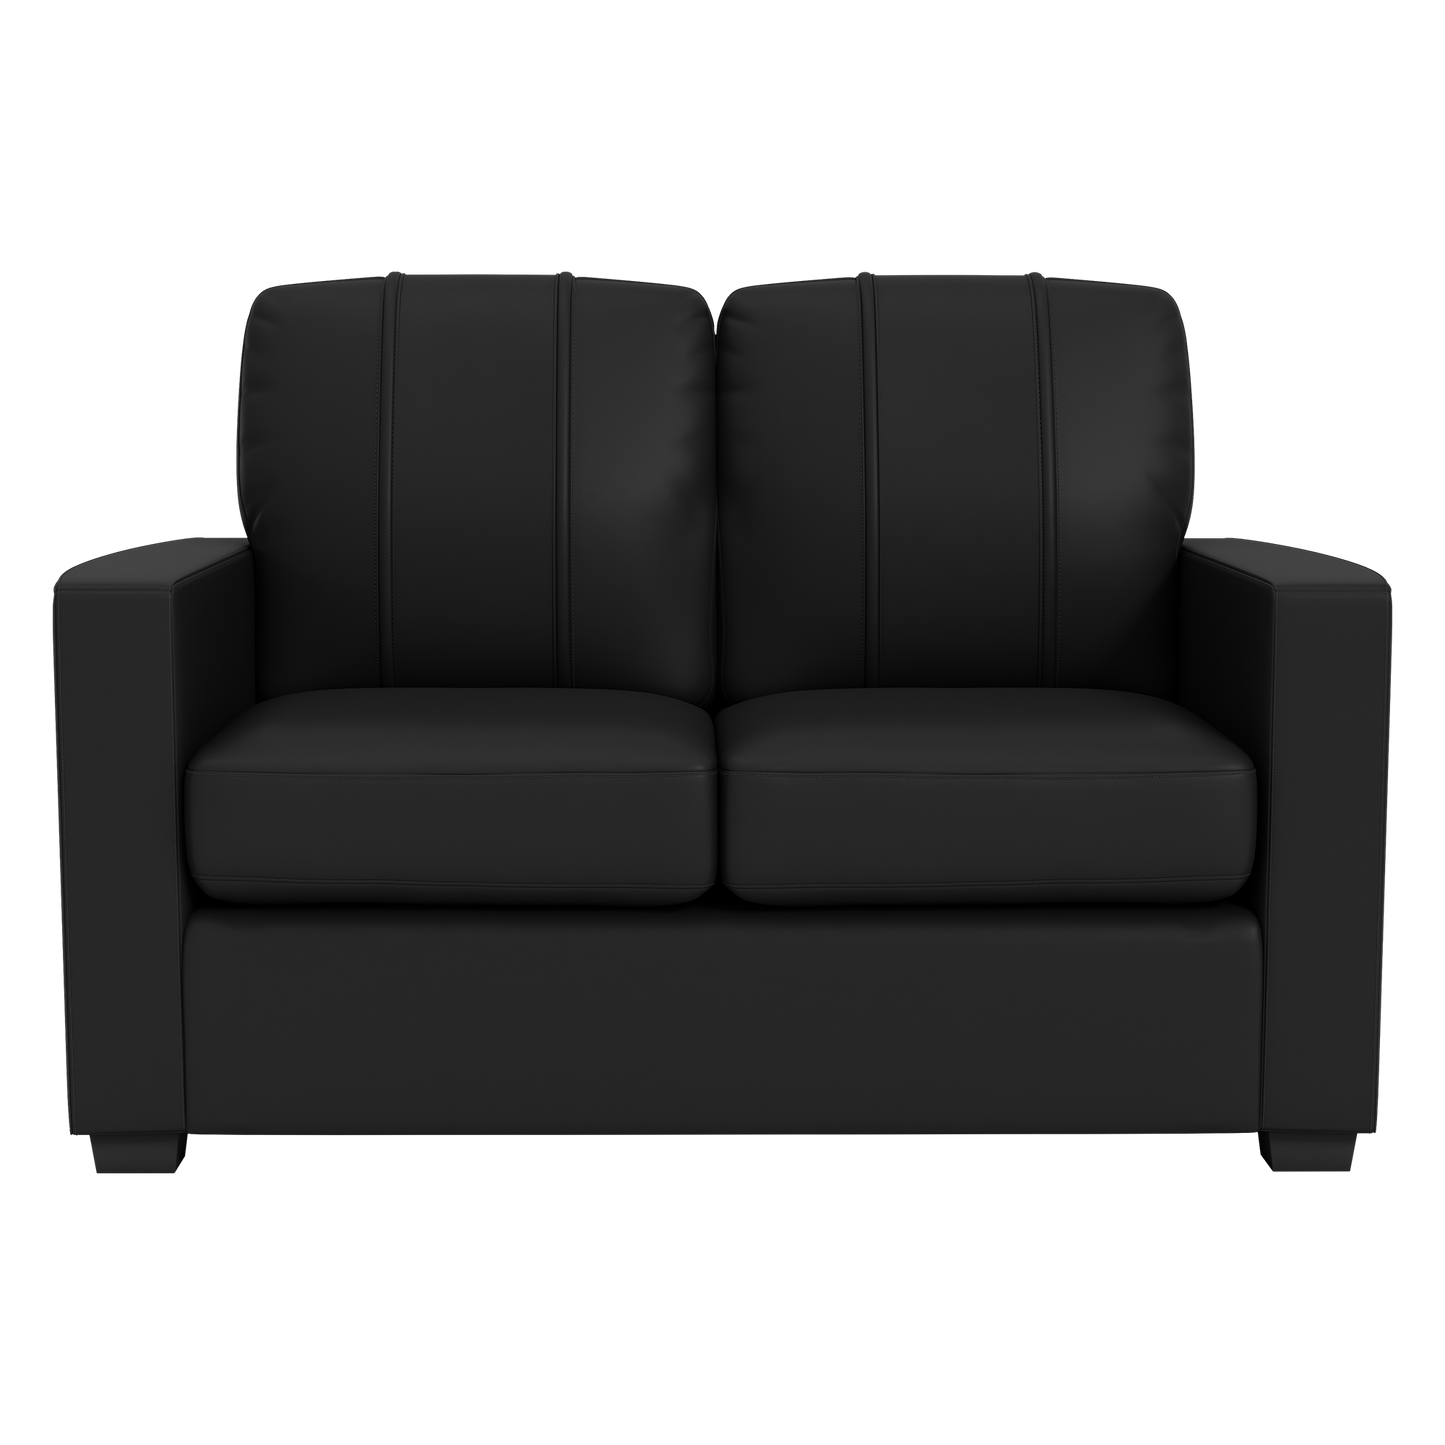 Silver Loveseat with Arizona Coyotes Third Jersey Logo